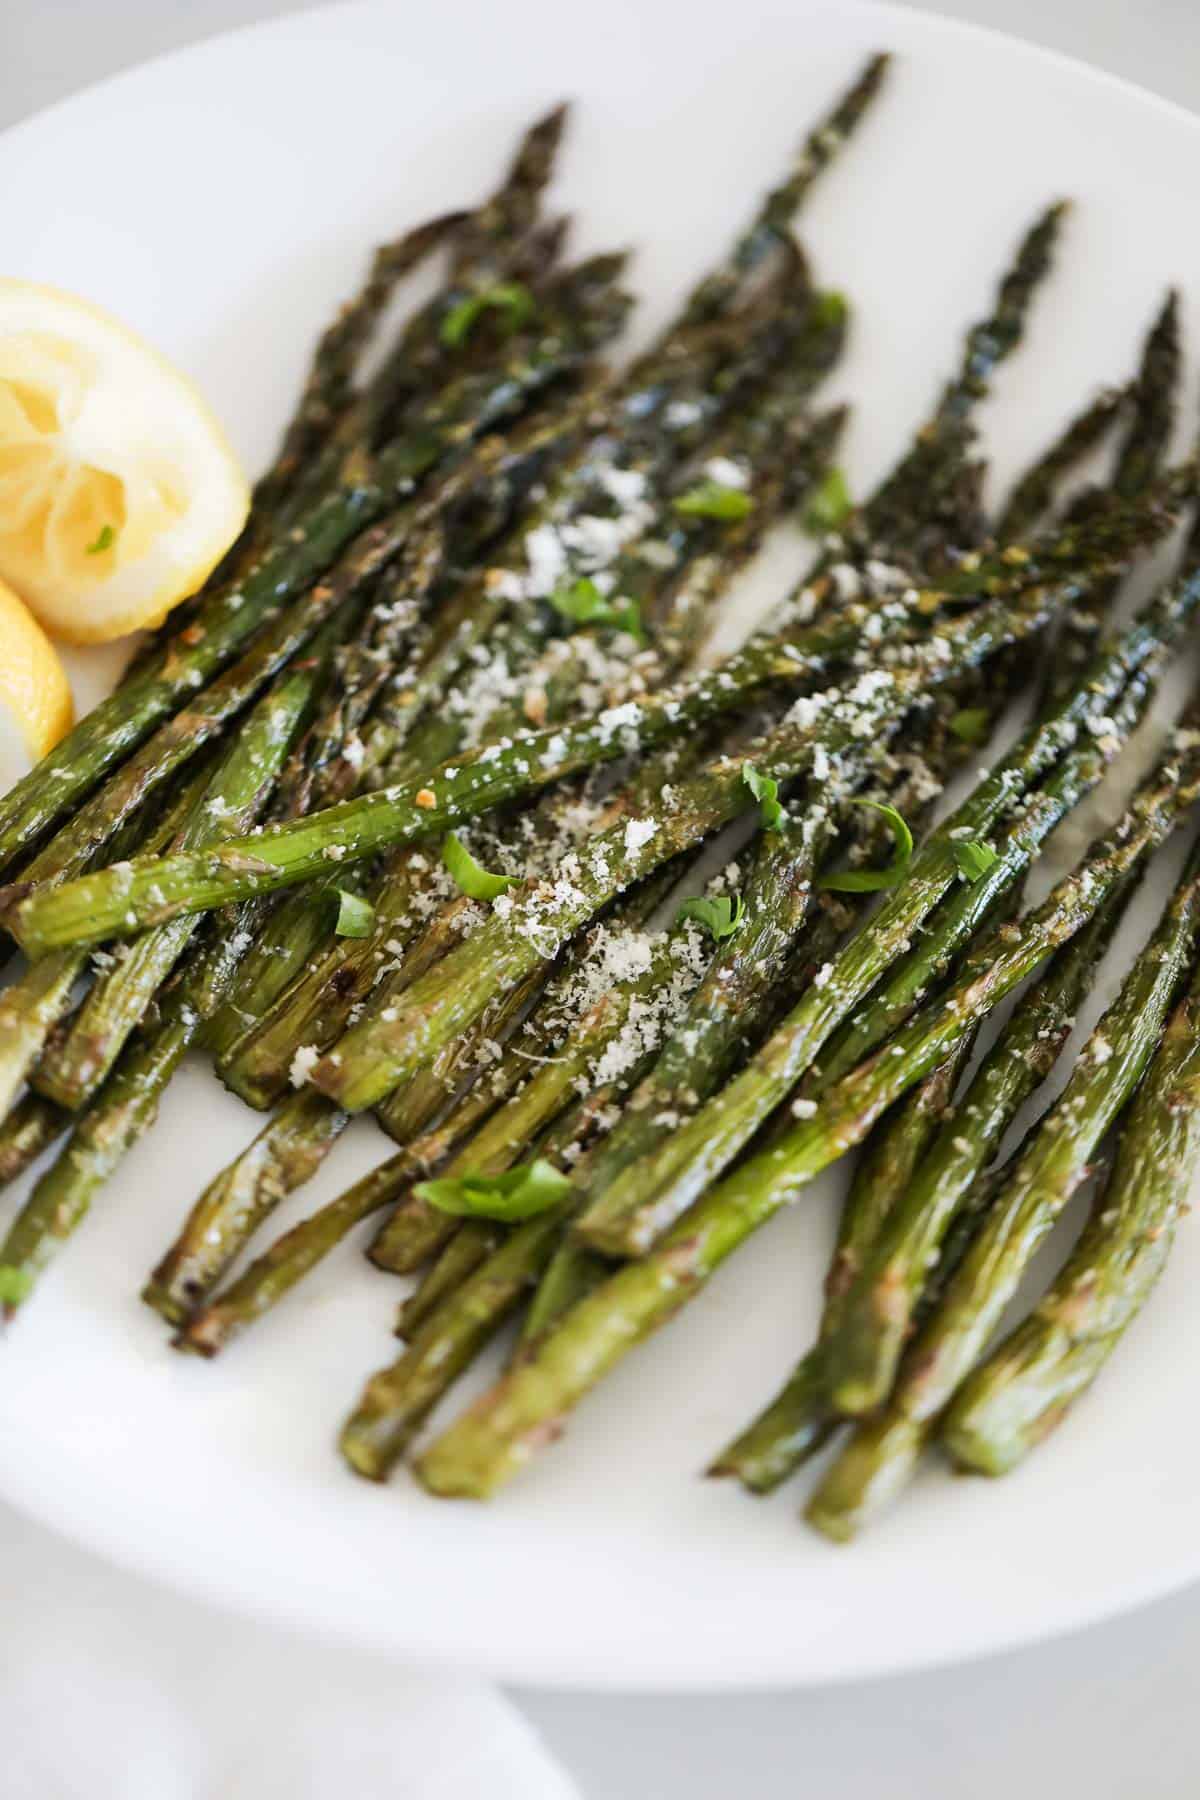 Grilled asparagus on white plate.